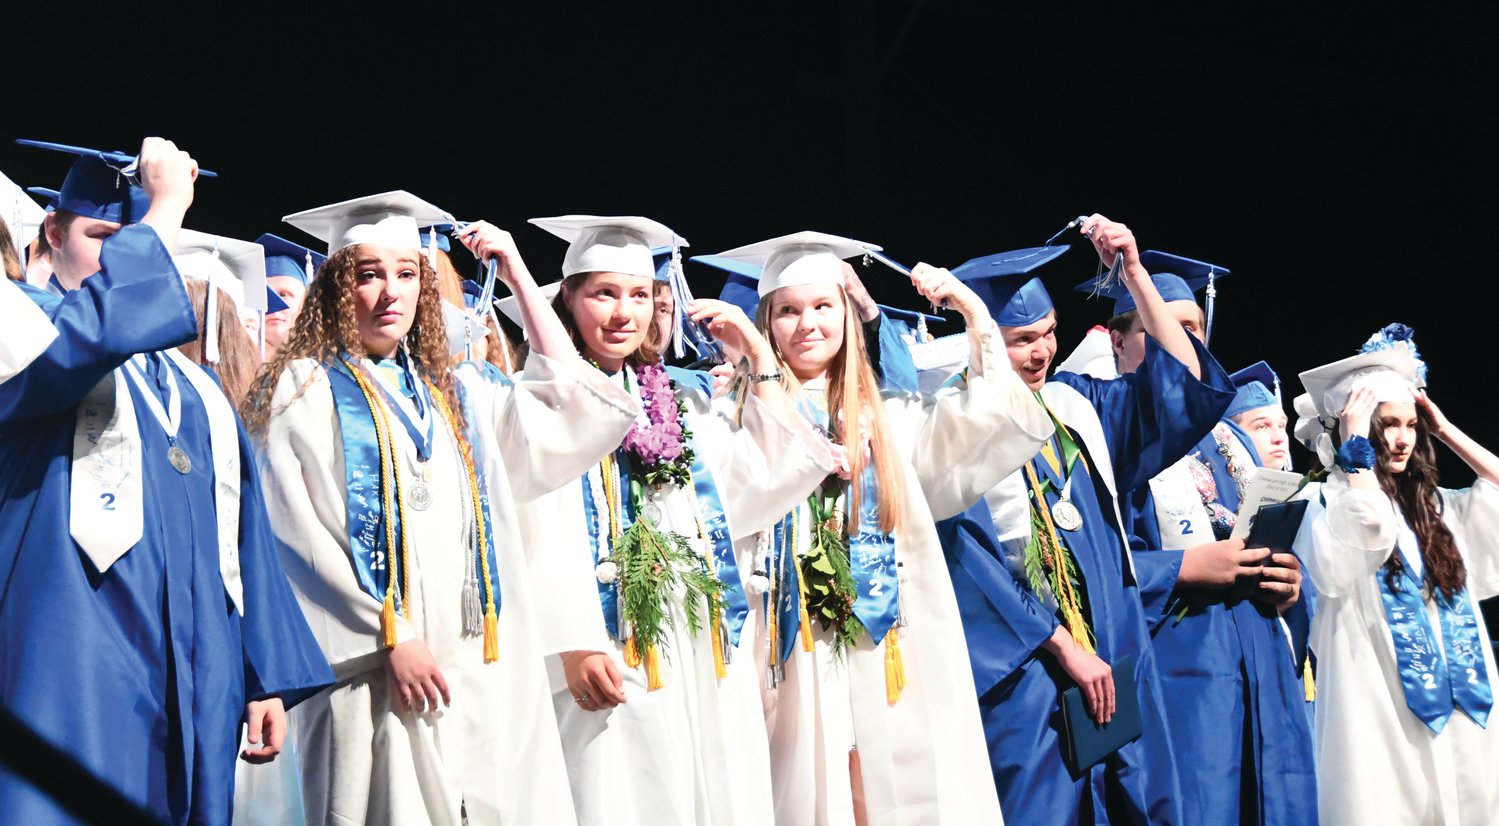 The graduating seniors turn the tassel as they eagerly anticipate the next chapter of life.